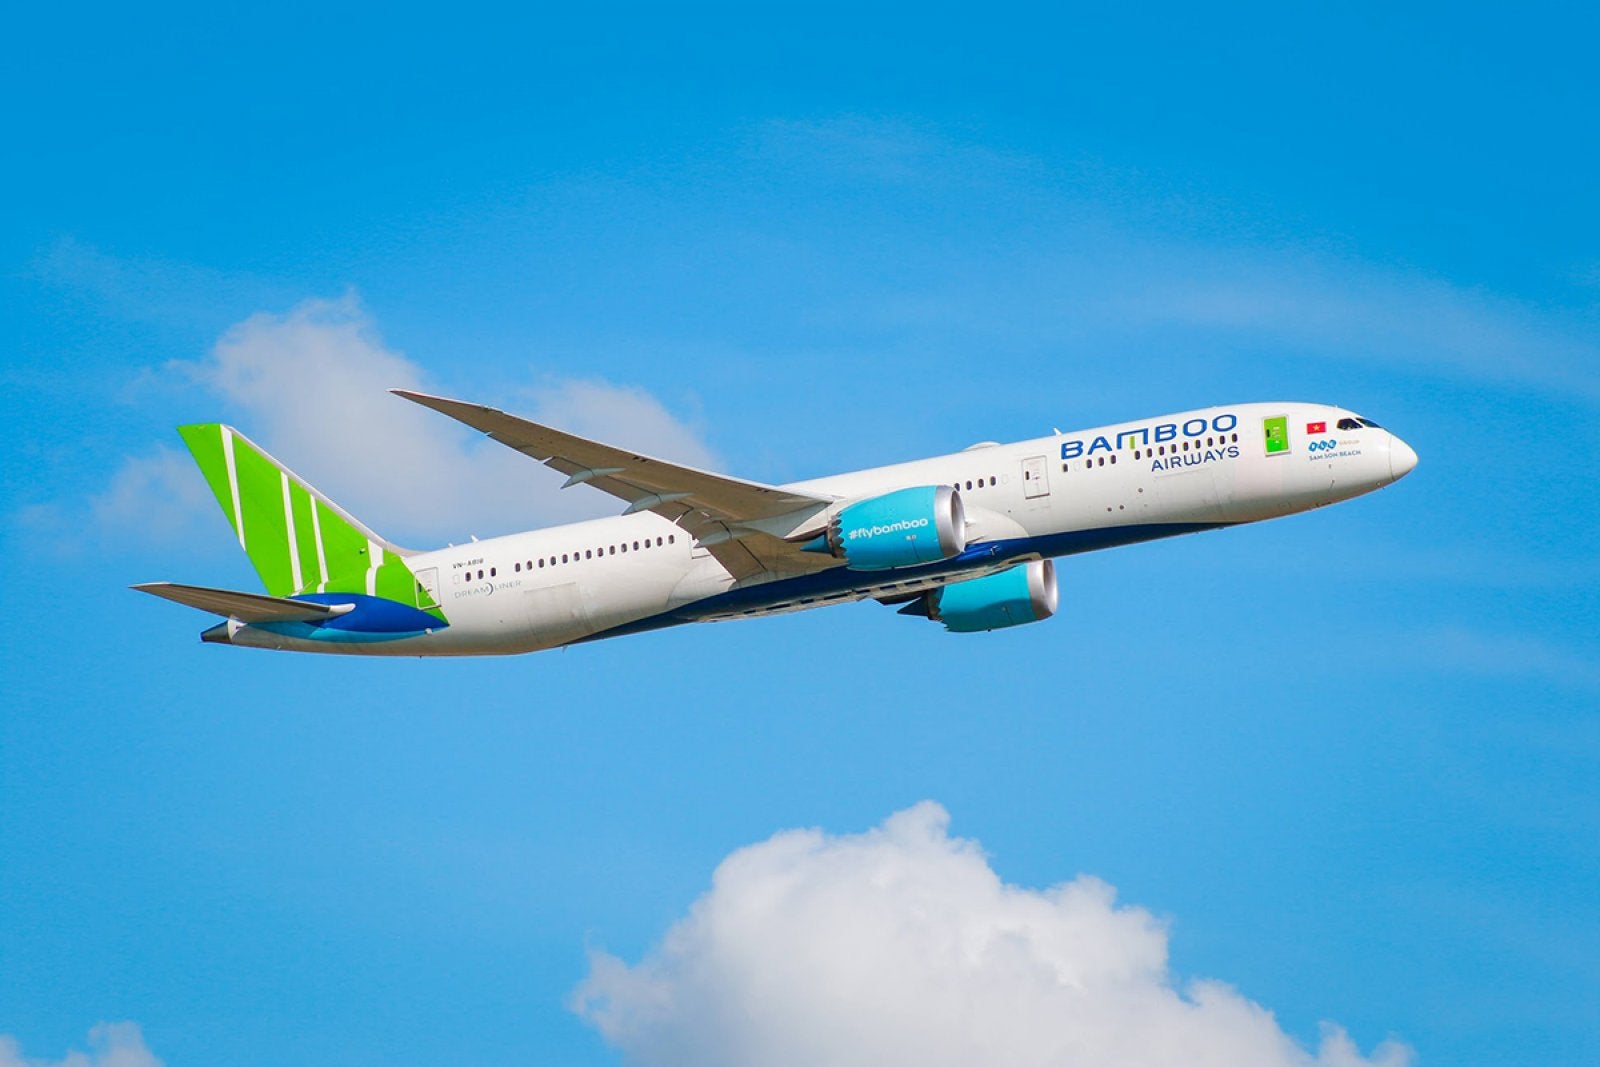 Bamboo Airways: First Airline To Fly Nonstop From Vietnam to U.S.